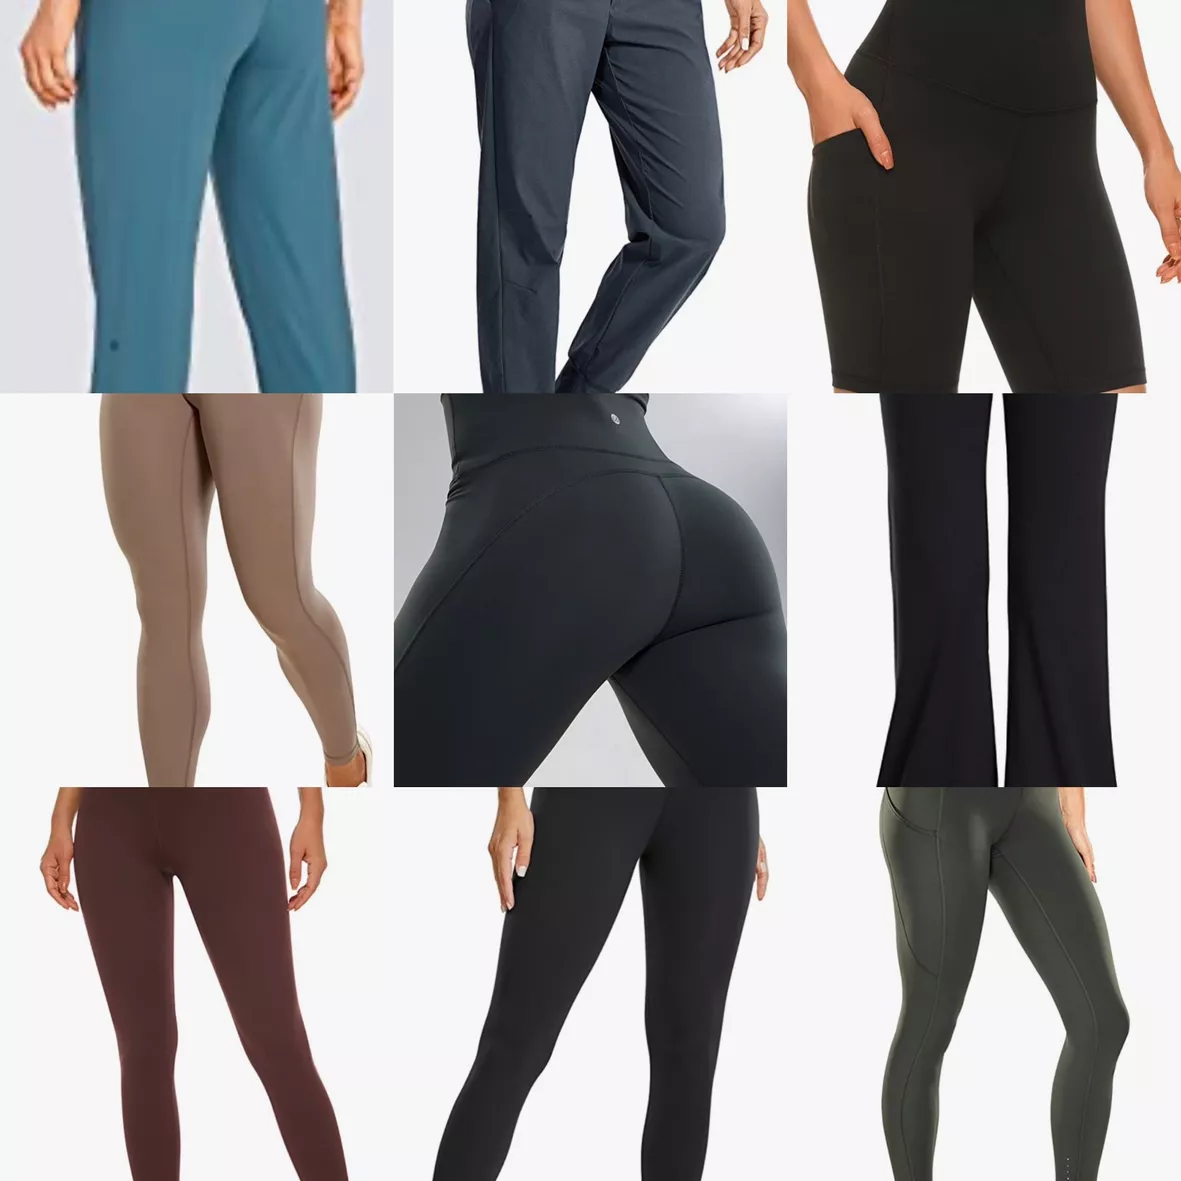 CRZ YOGA Ulti-Dry Workout Leggings for Women 25'' - High Waisted